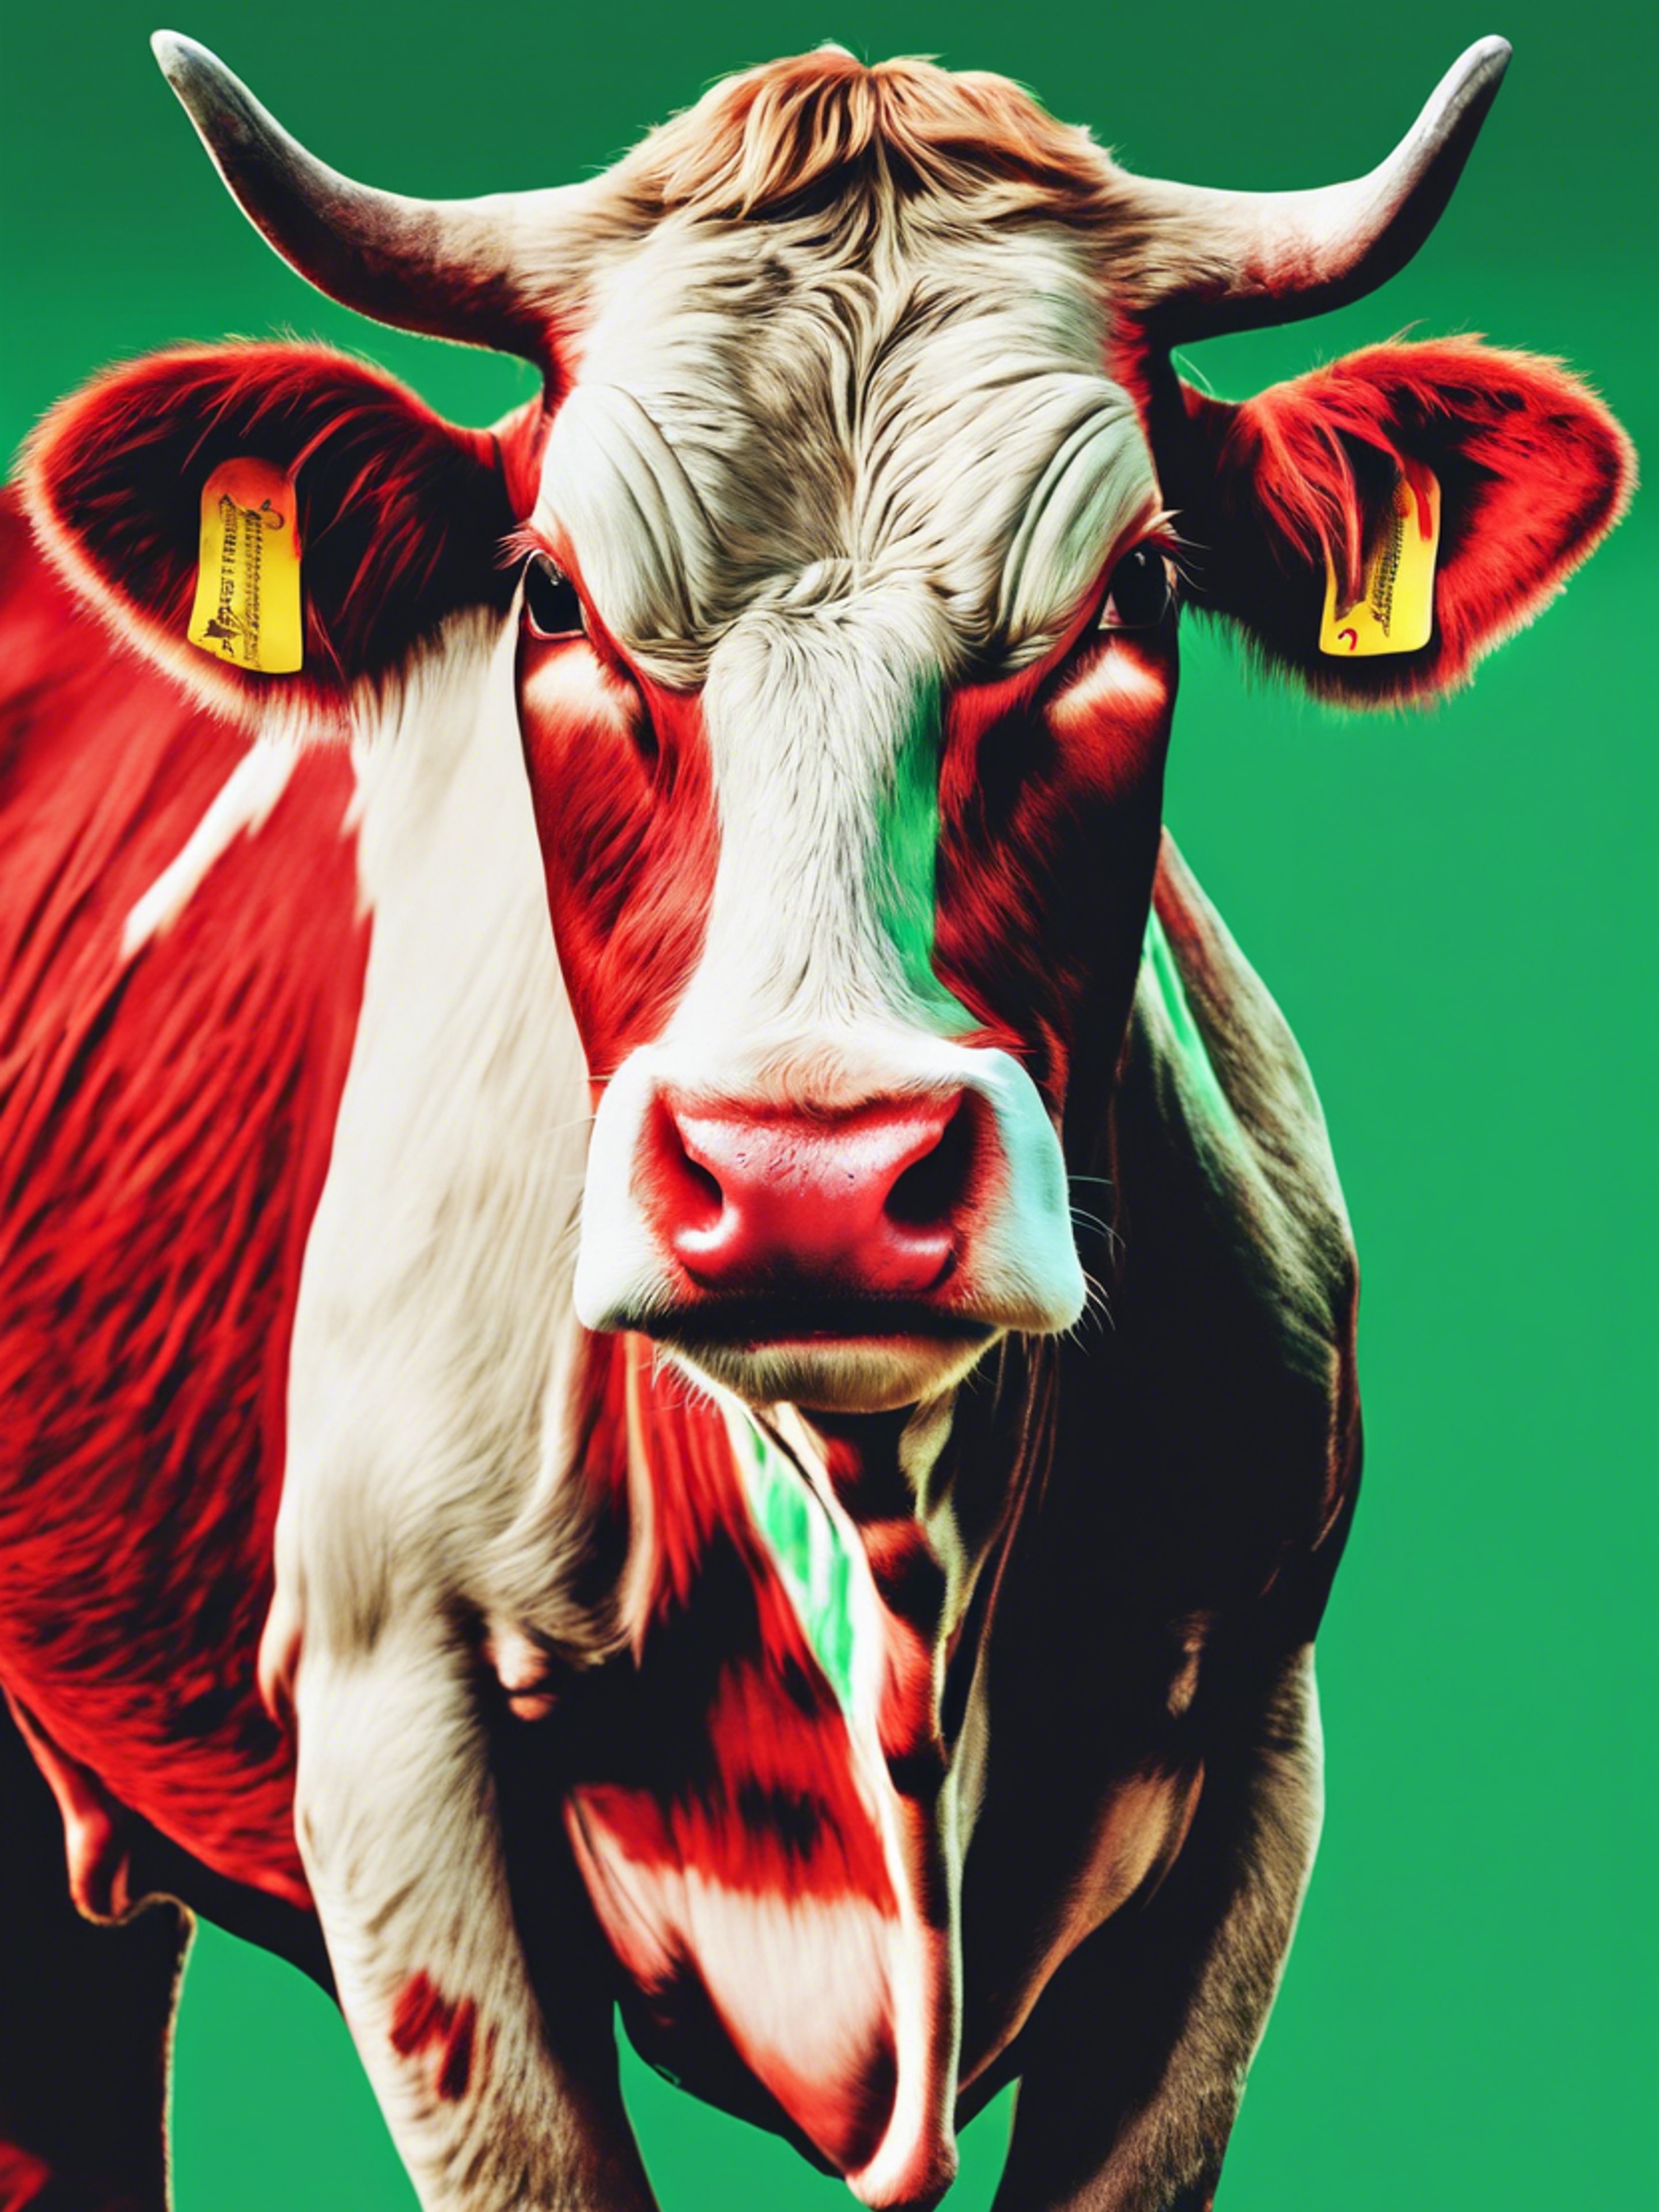 Pop-art style cow print in a palette of red and green. Sfondo[5b65906f2b9649418c8c]